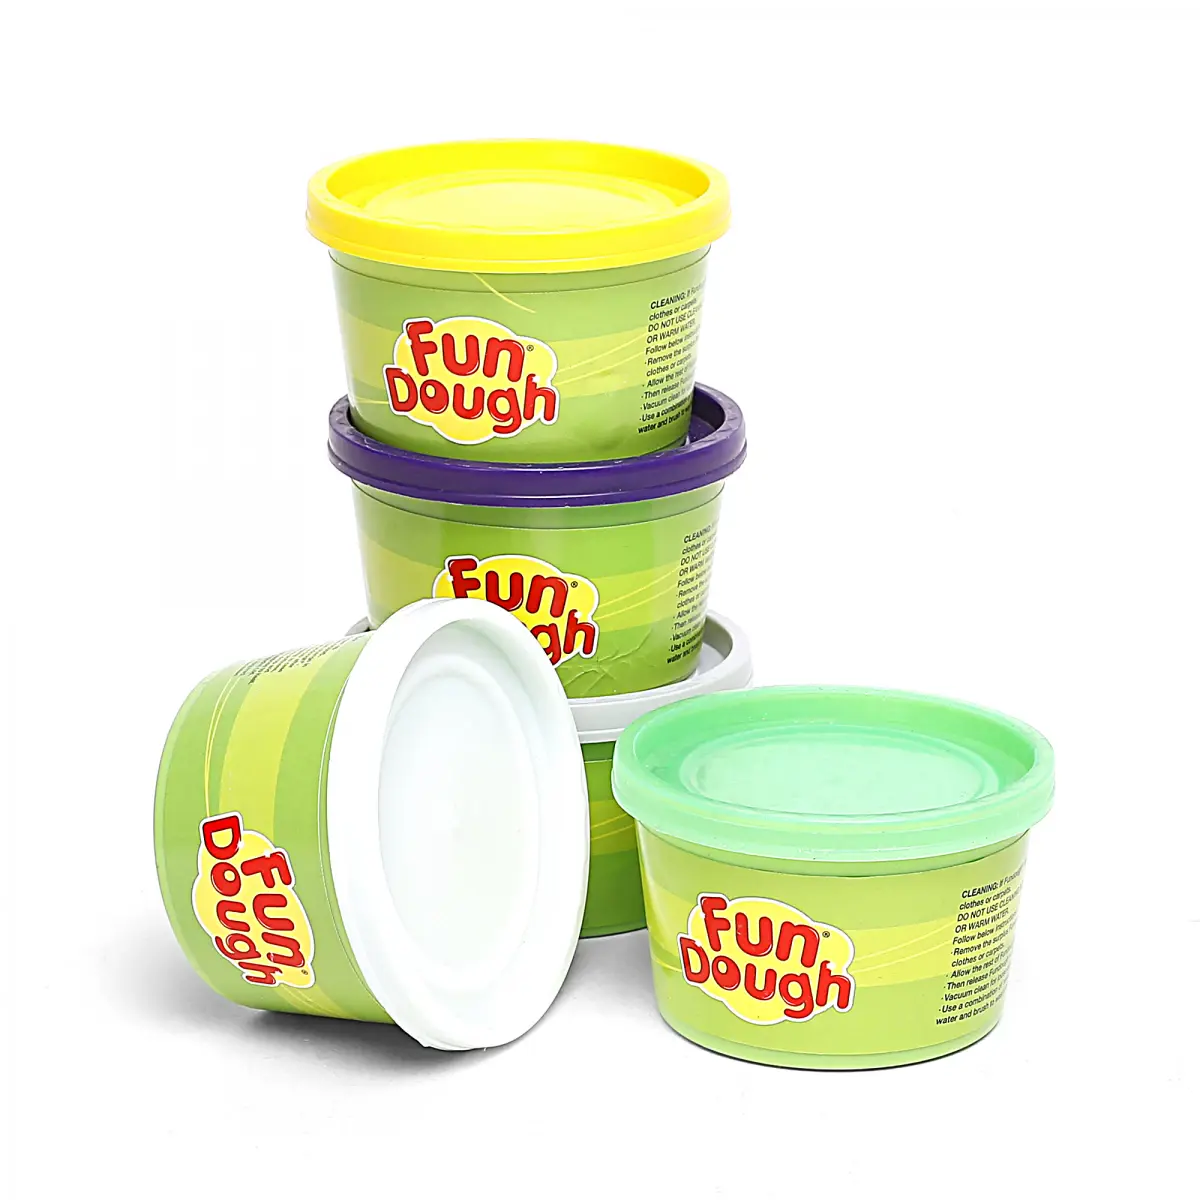 Funskool Fun Dough Space Jam with 5 tubs of 75g each & Accessories, 12M+, Multicolour